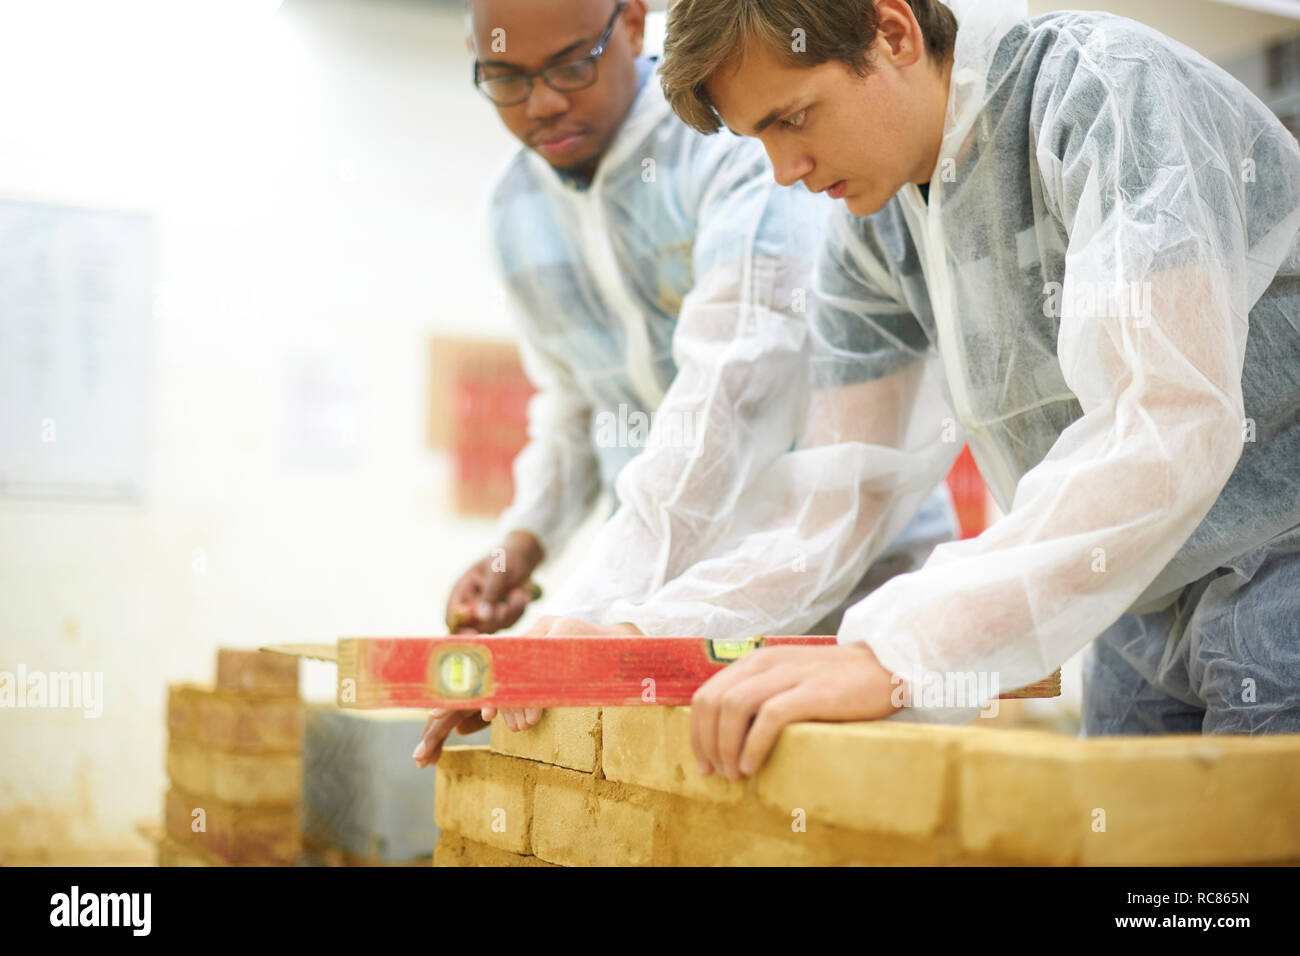 Male higher education students building brick wall in college workshop Stock Photo